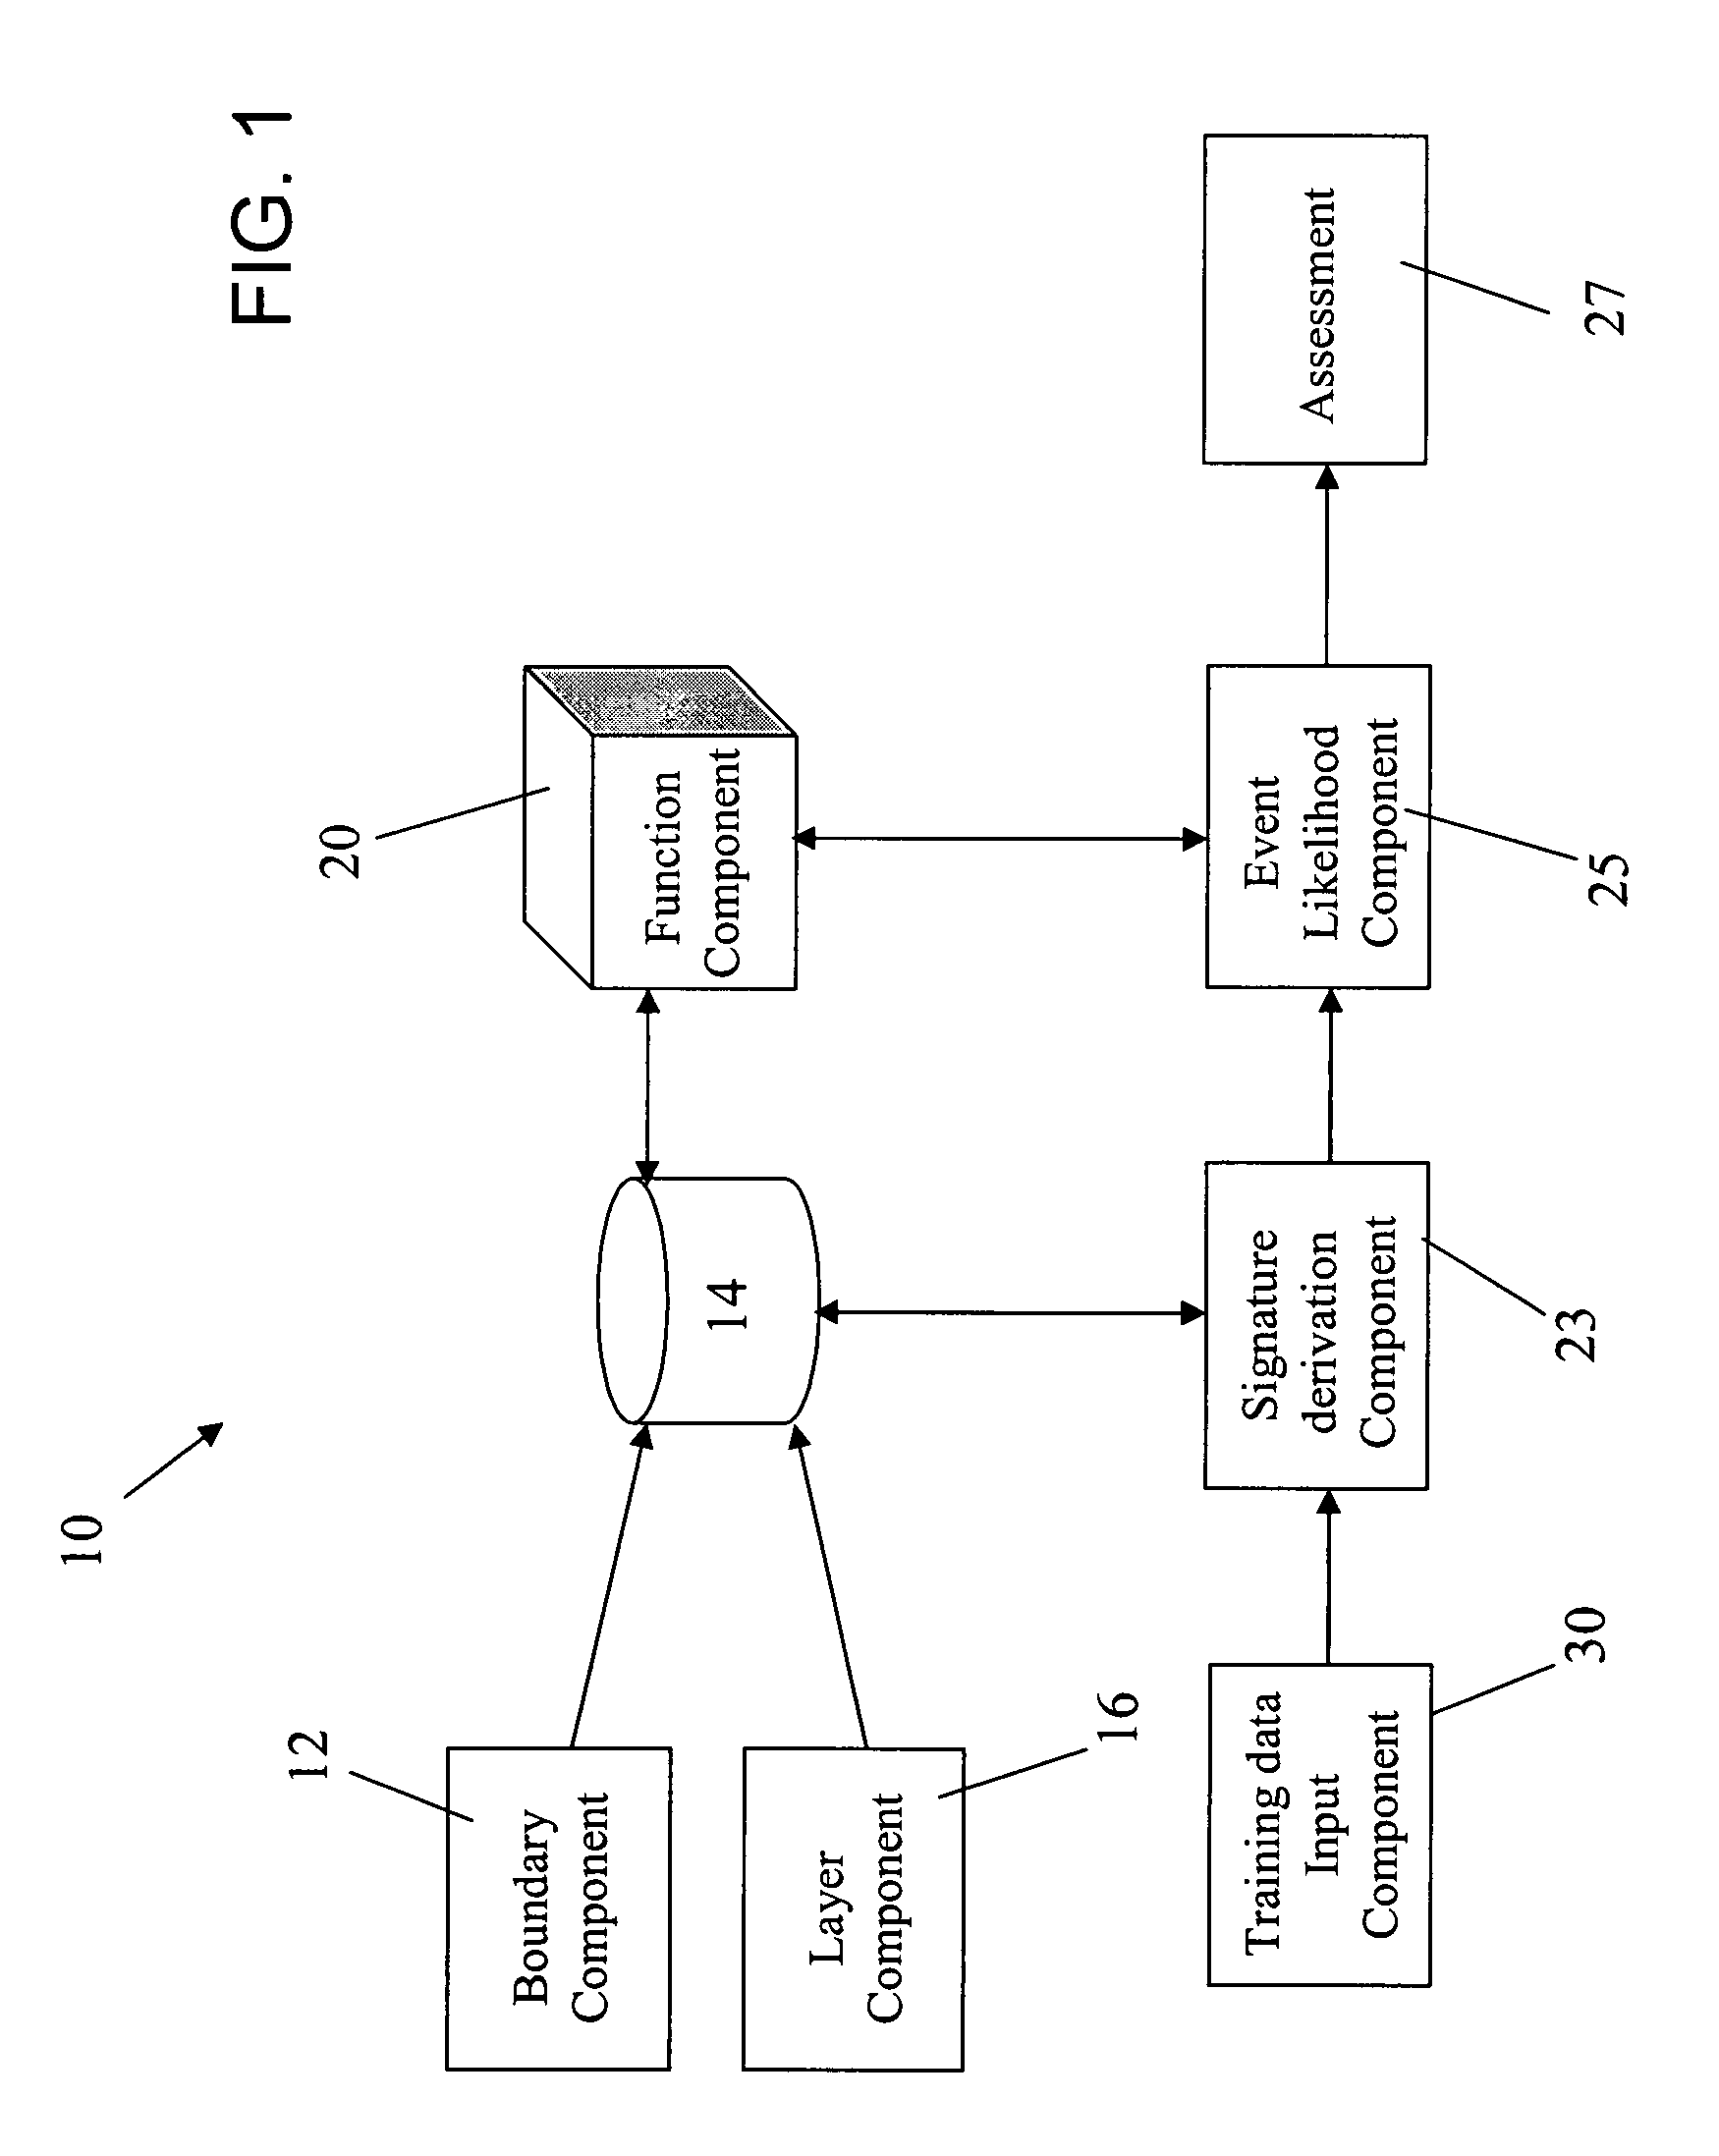 Event, threat and result change detection system and method